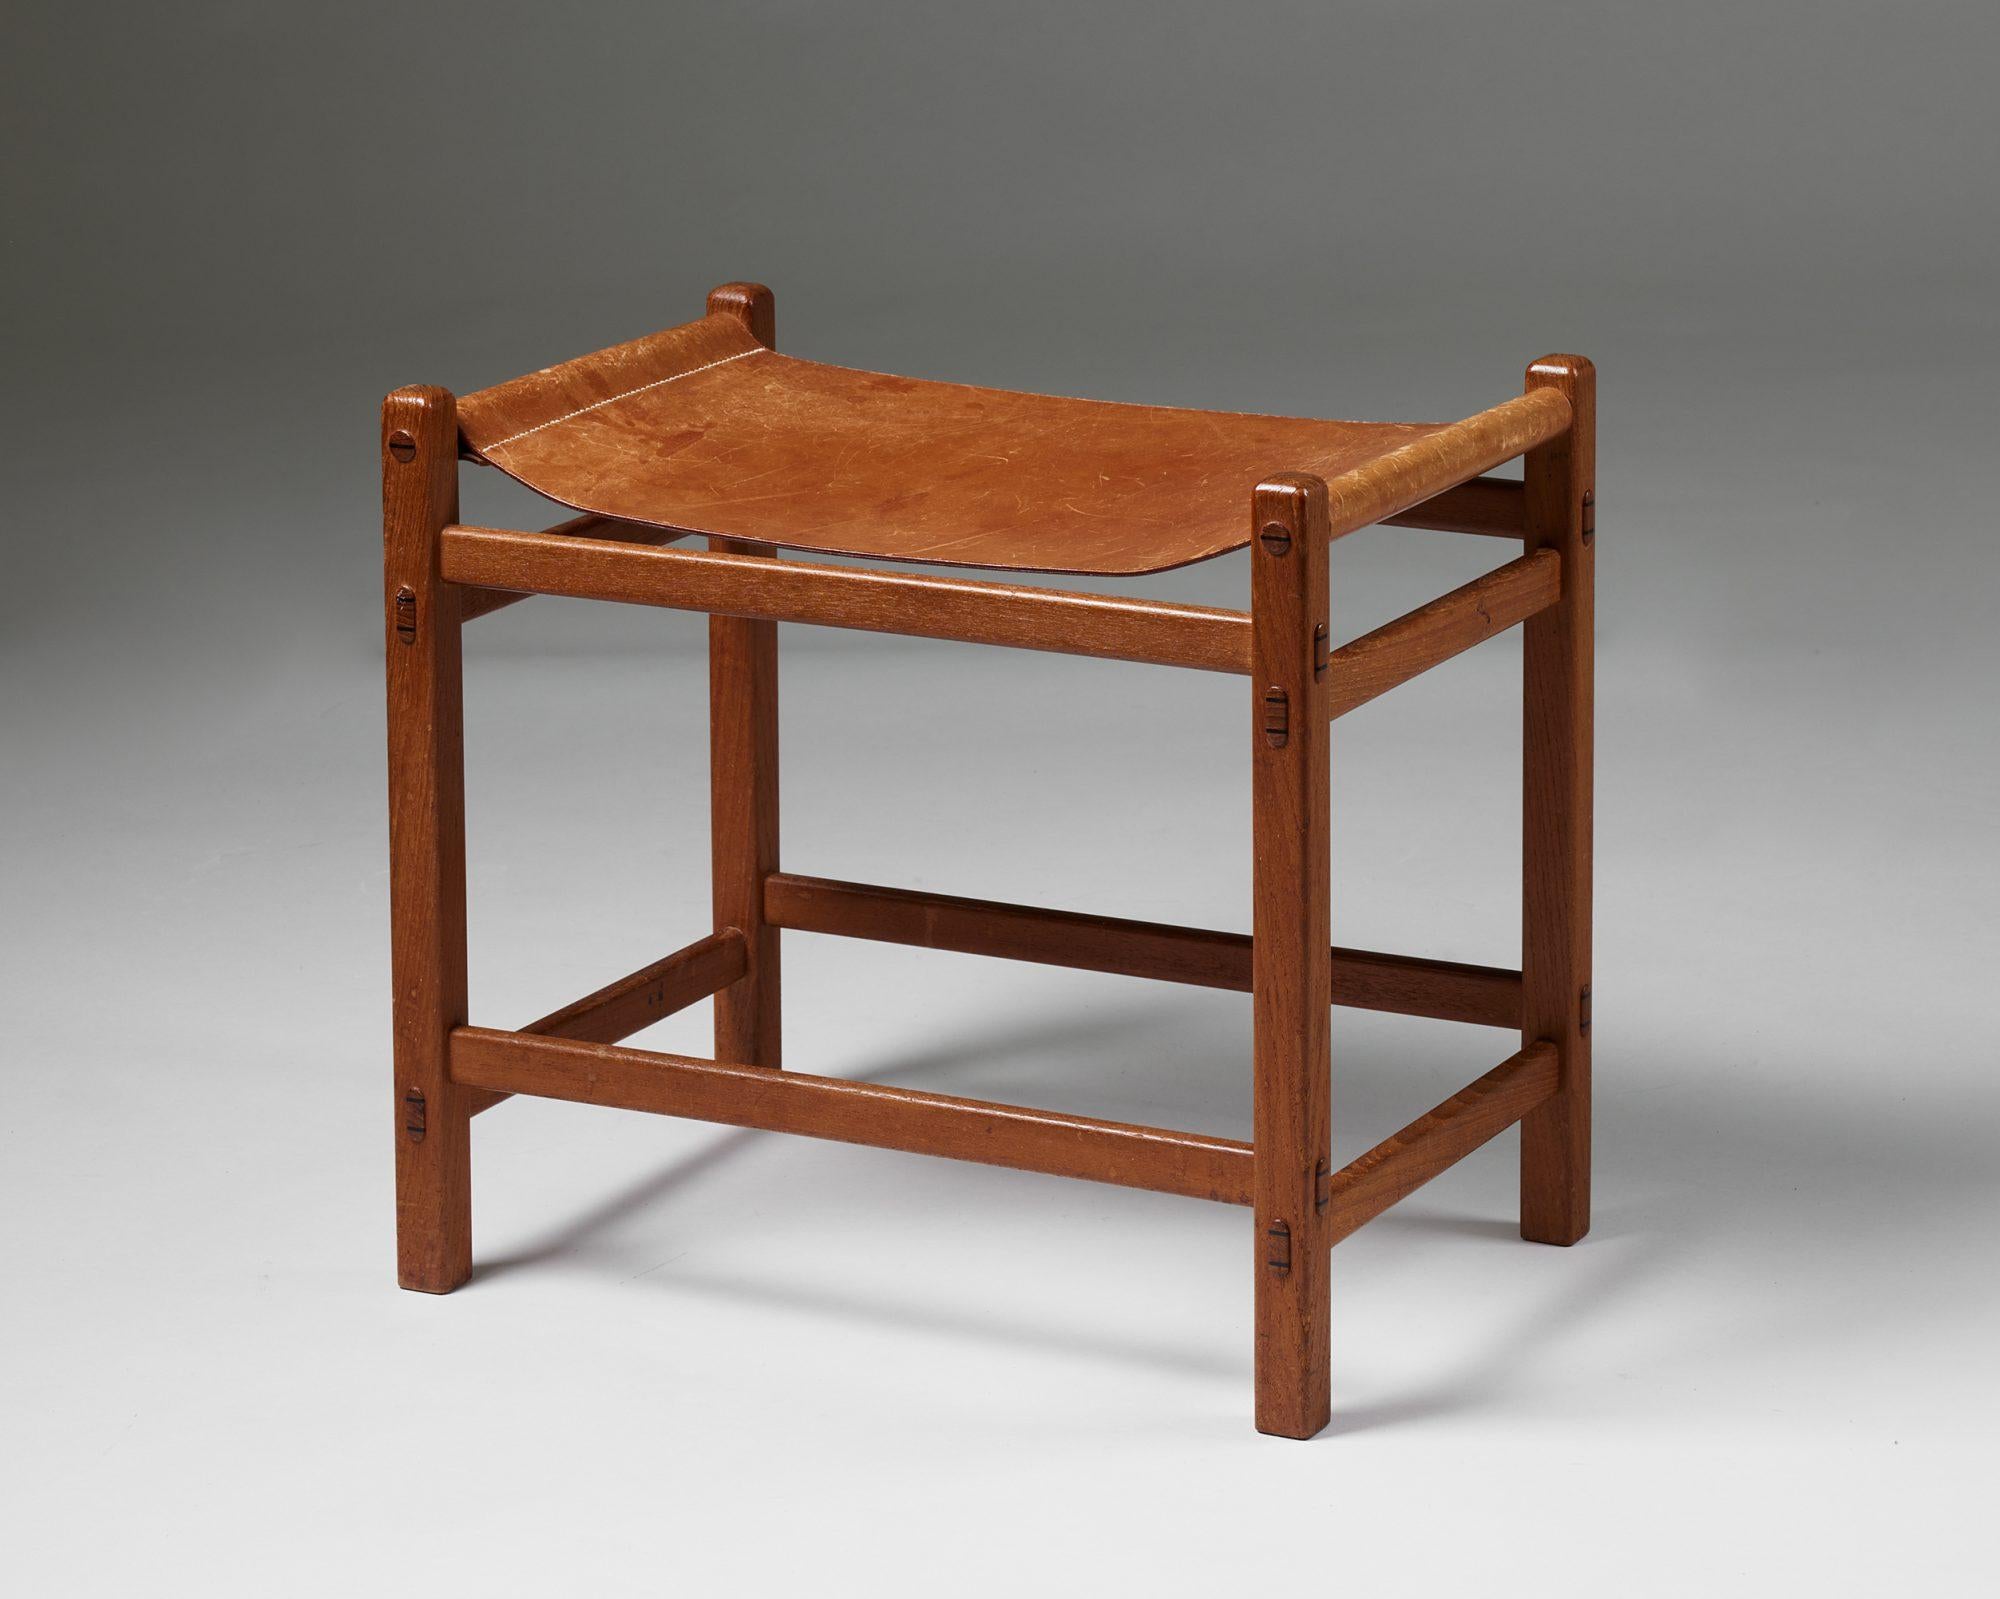 Stool designed by Stig Lönngren,
Sweden, 1947.

Teak and leather.

Stig Lönngren (1924-2022) received his carpentry qualifications in 1946. He went on to become an important Swedish interior architect, working with Carl-Axel Acking, Sven Hesselgren,